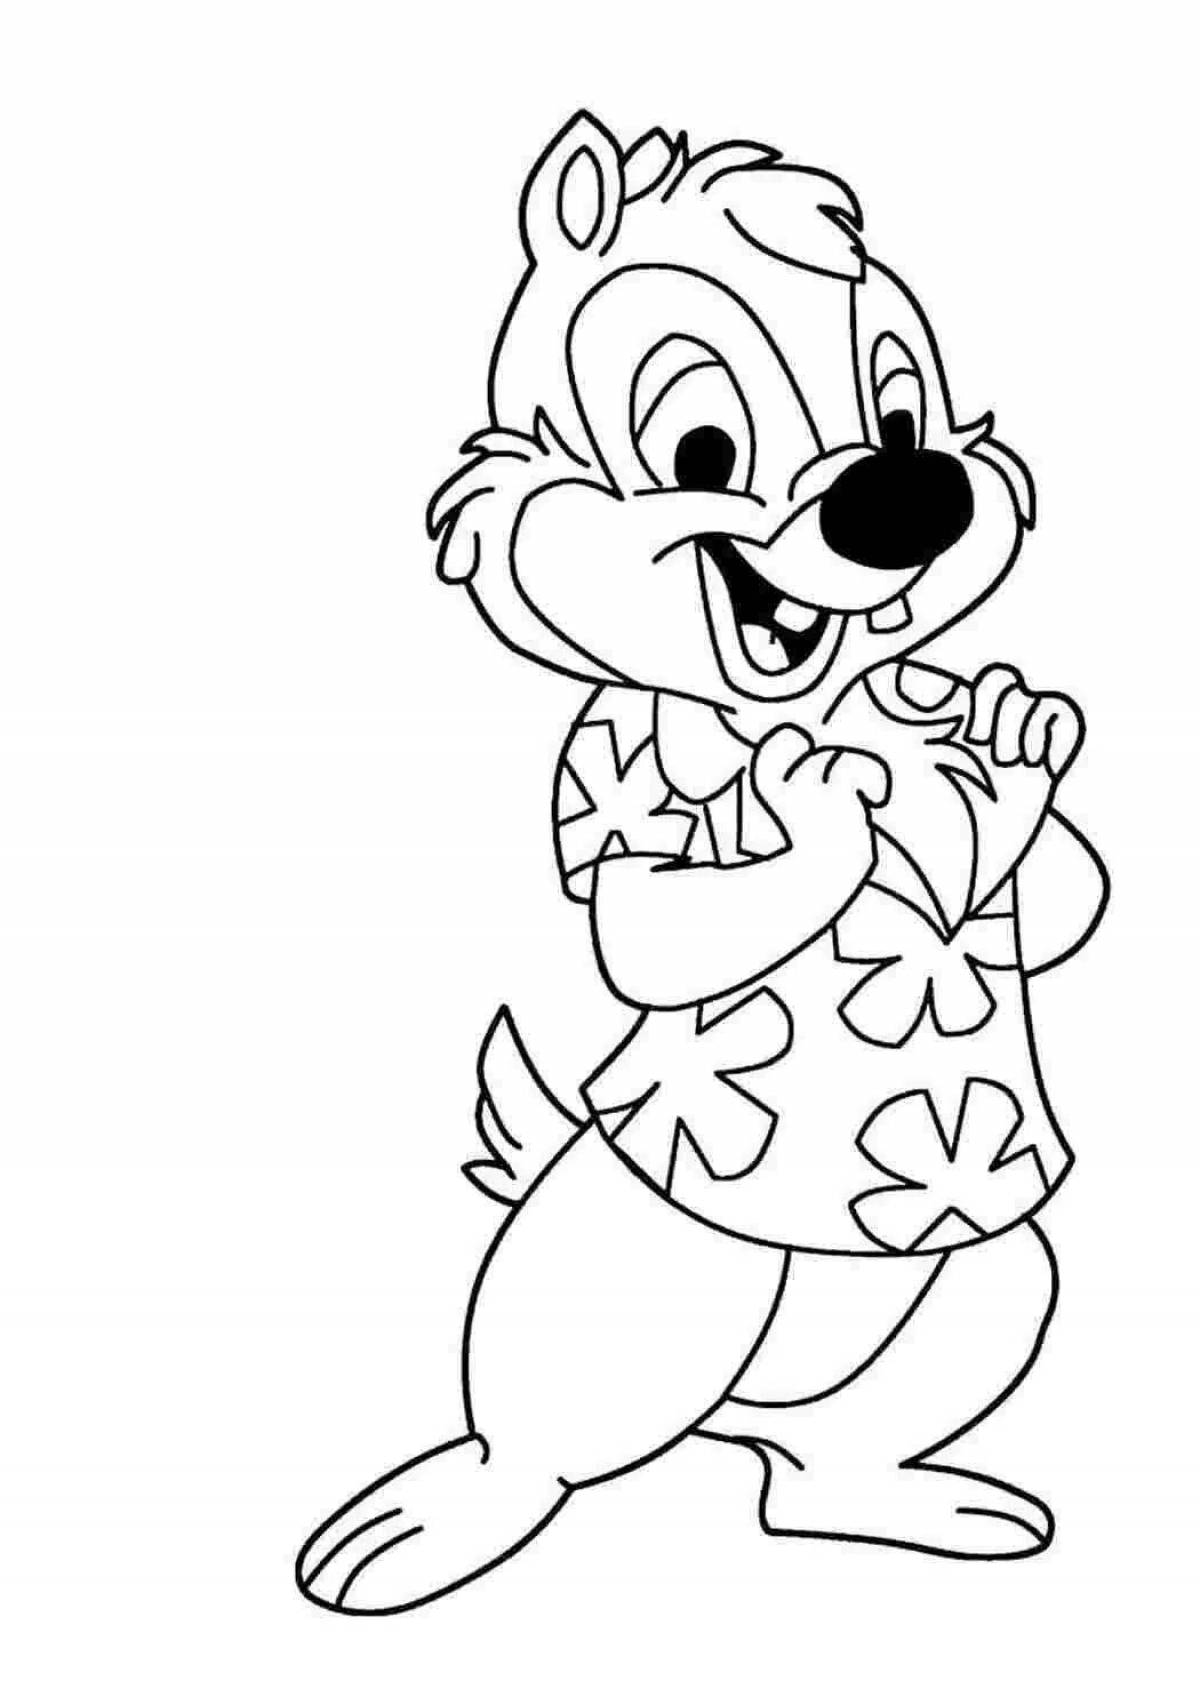 Adorable chip and dale coloring book for kids